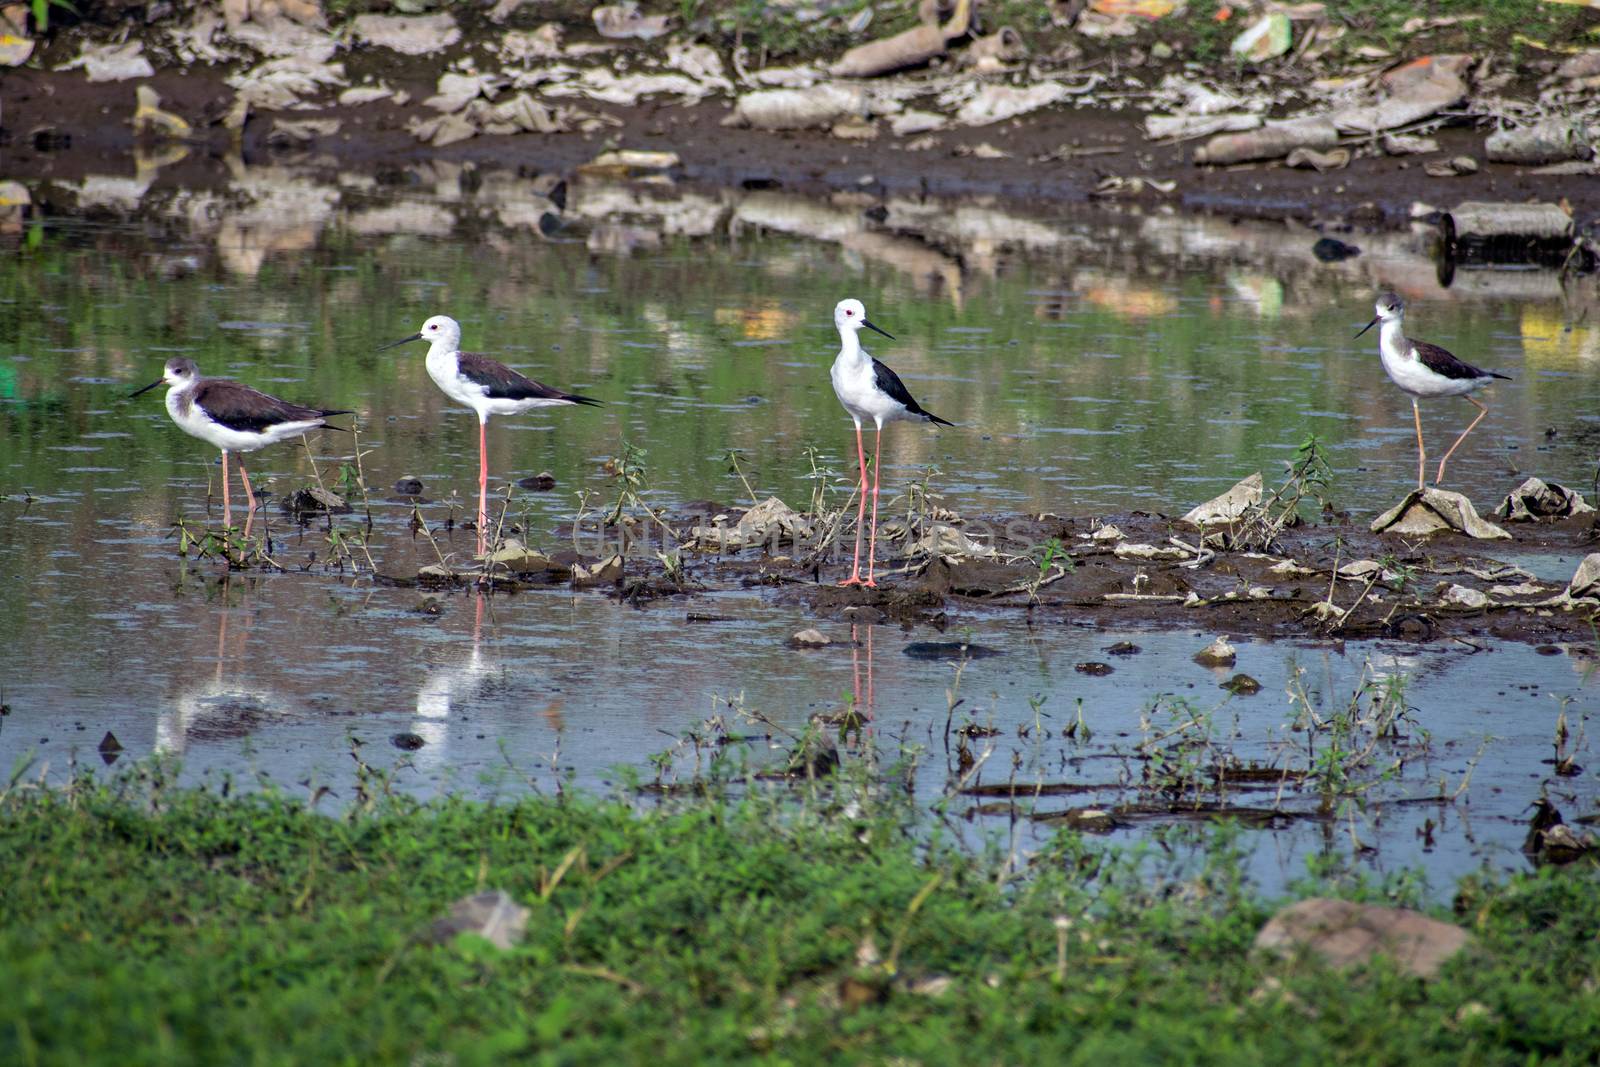 A group of four Black-winged Stilt searching food on river bank., Daund, Maharashtra, India